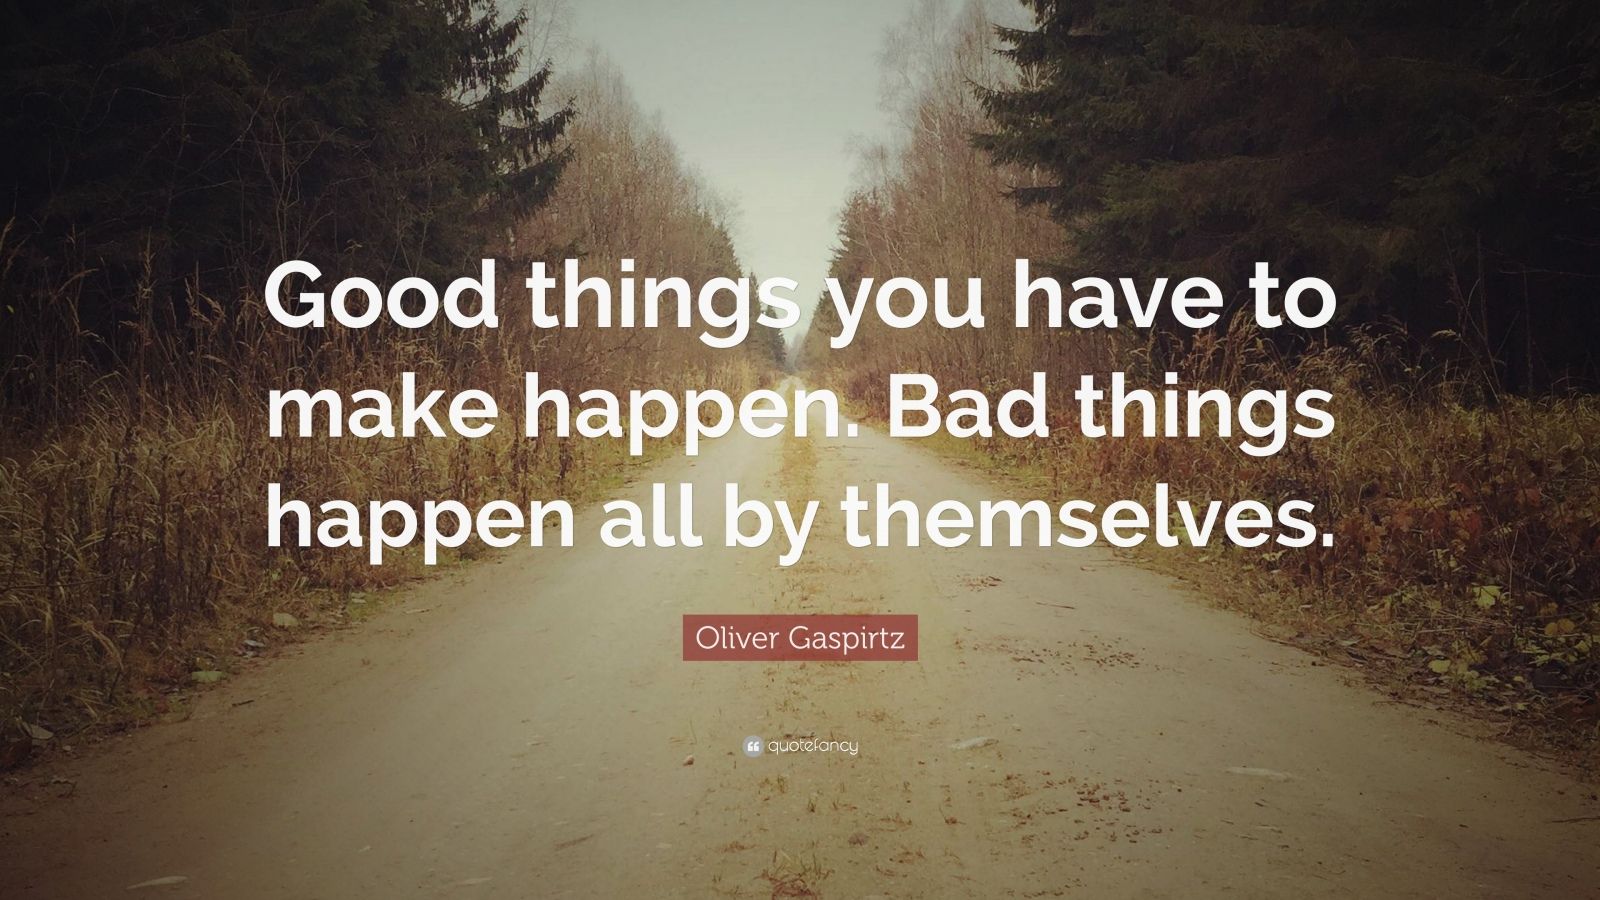 Best Bad Things Happen Quotes in the world Don t miss out 